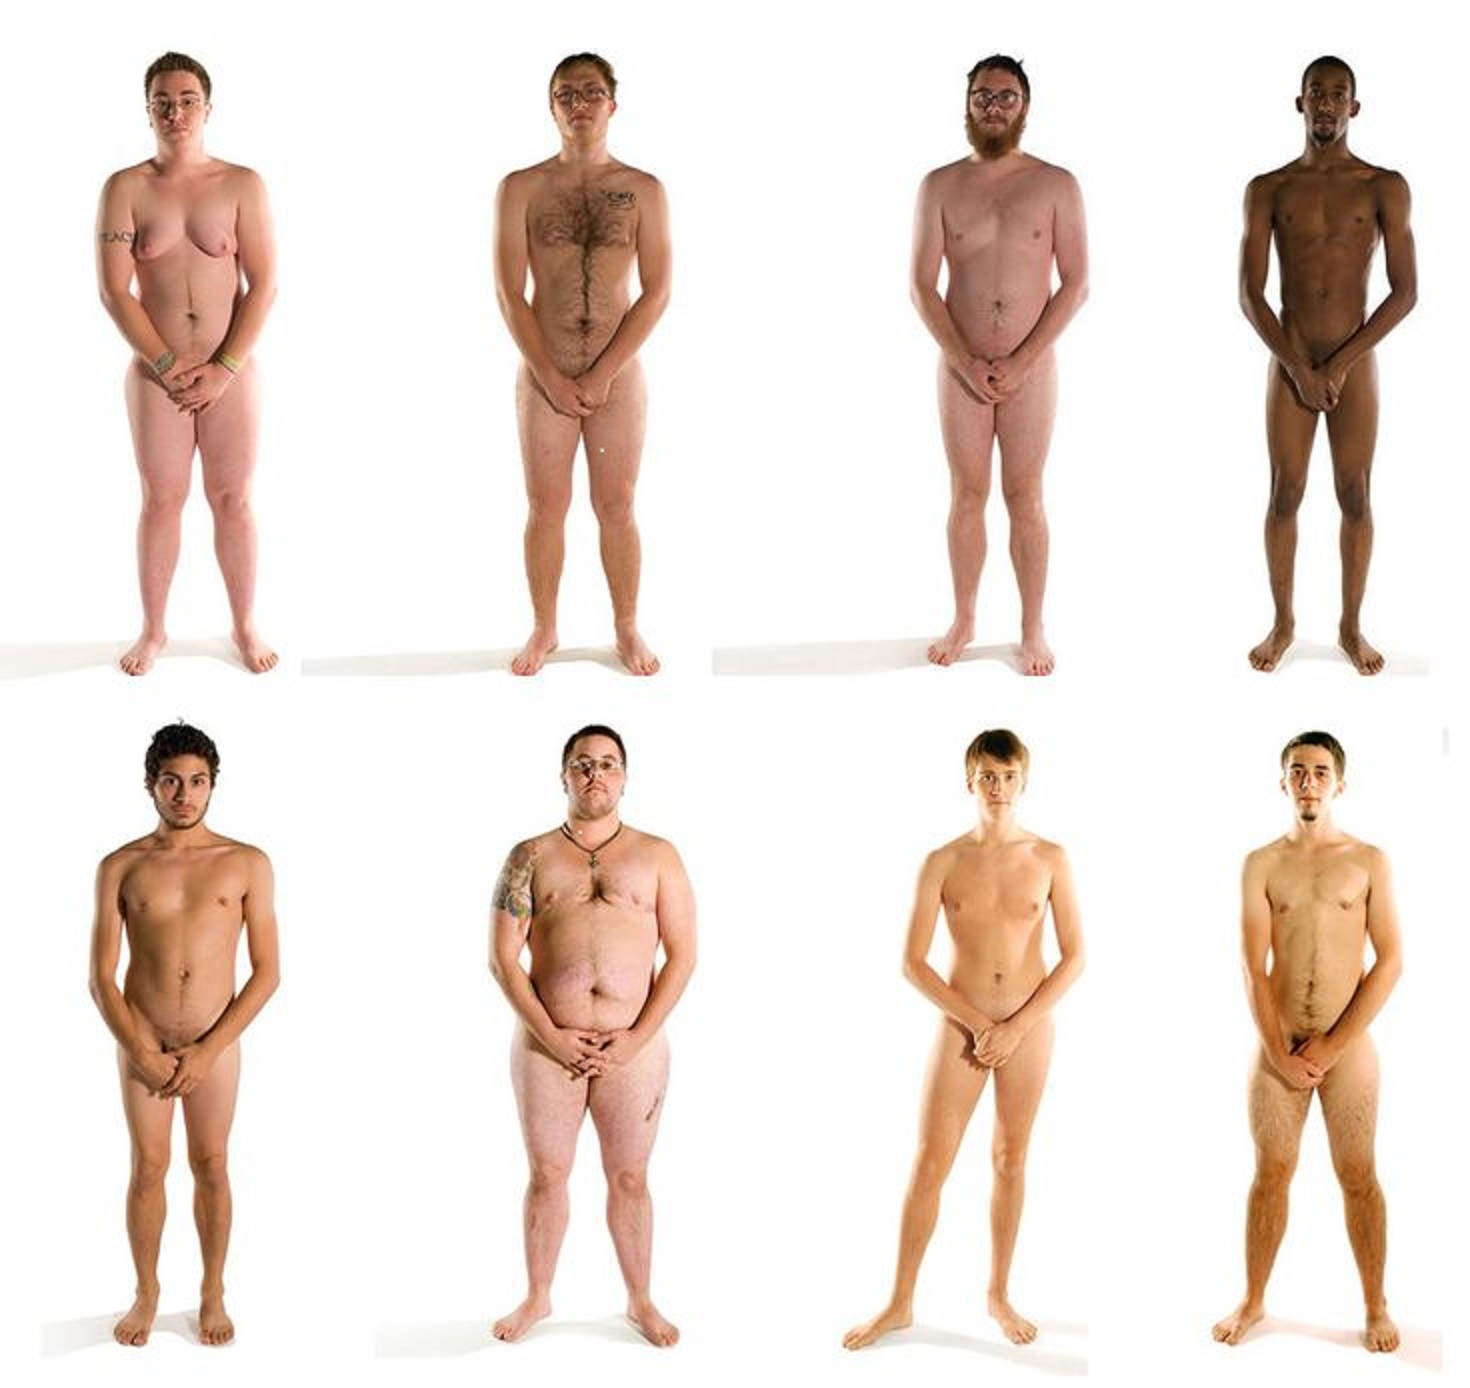 Provocative International Nude Guys 2018 by pwfm cumming November 23rd.